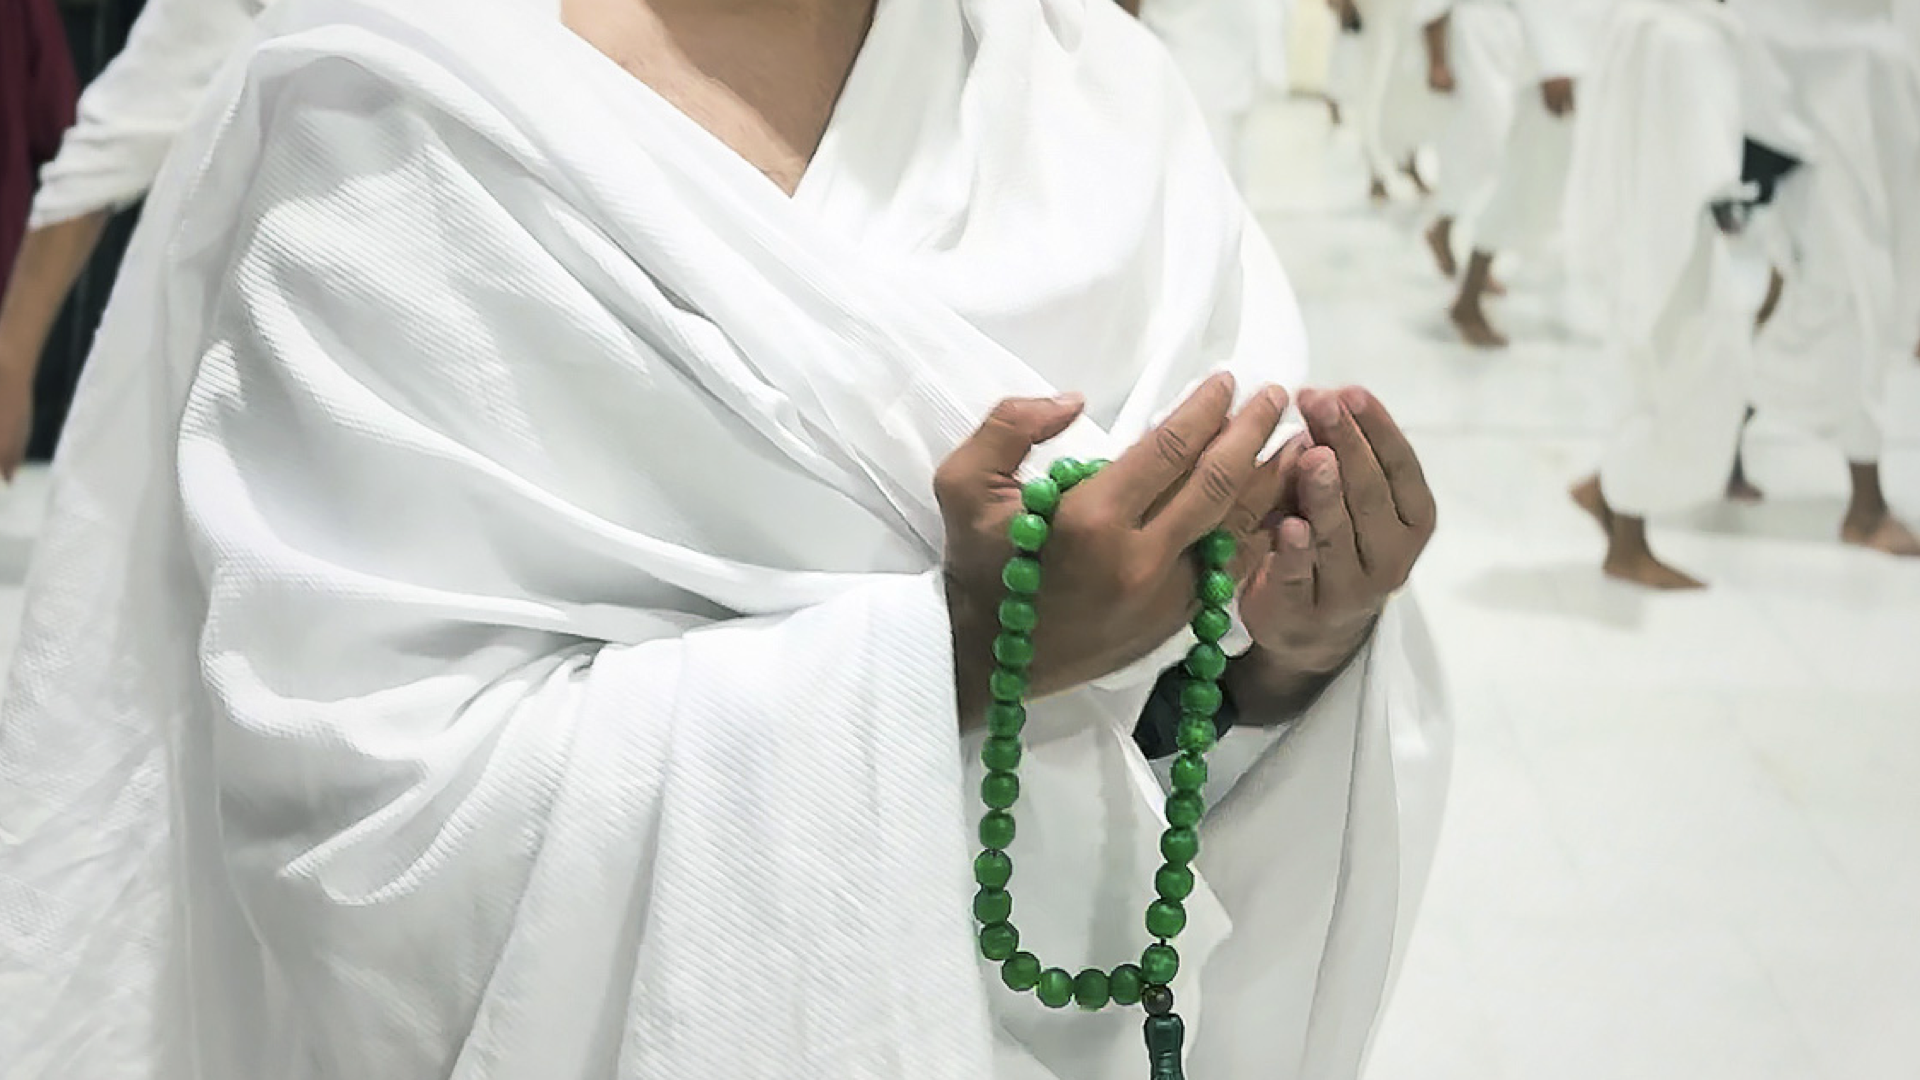 Saudia Launches ProtecTasbih, the First Sanitizing Prayer Beads for Pilgrims Globally